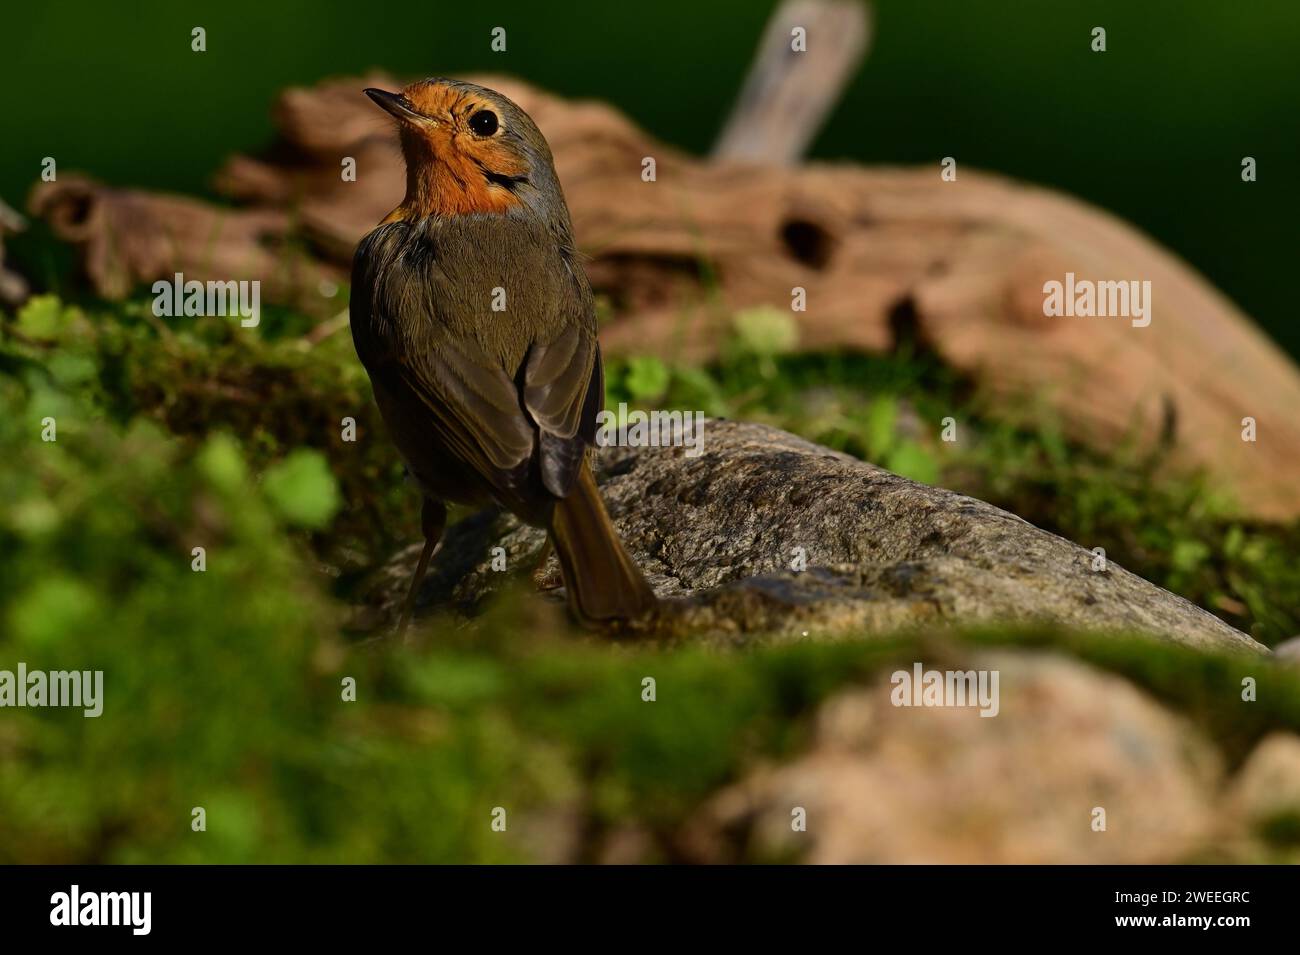 European robin (Erithacus rubecula) standing on a mossy stone. It is an important species near humans in biological control. Greece, Nea Peramos Stock Photo